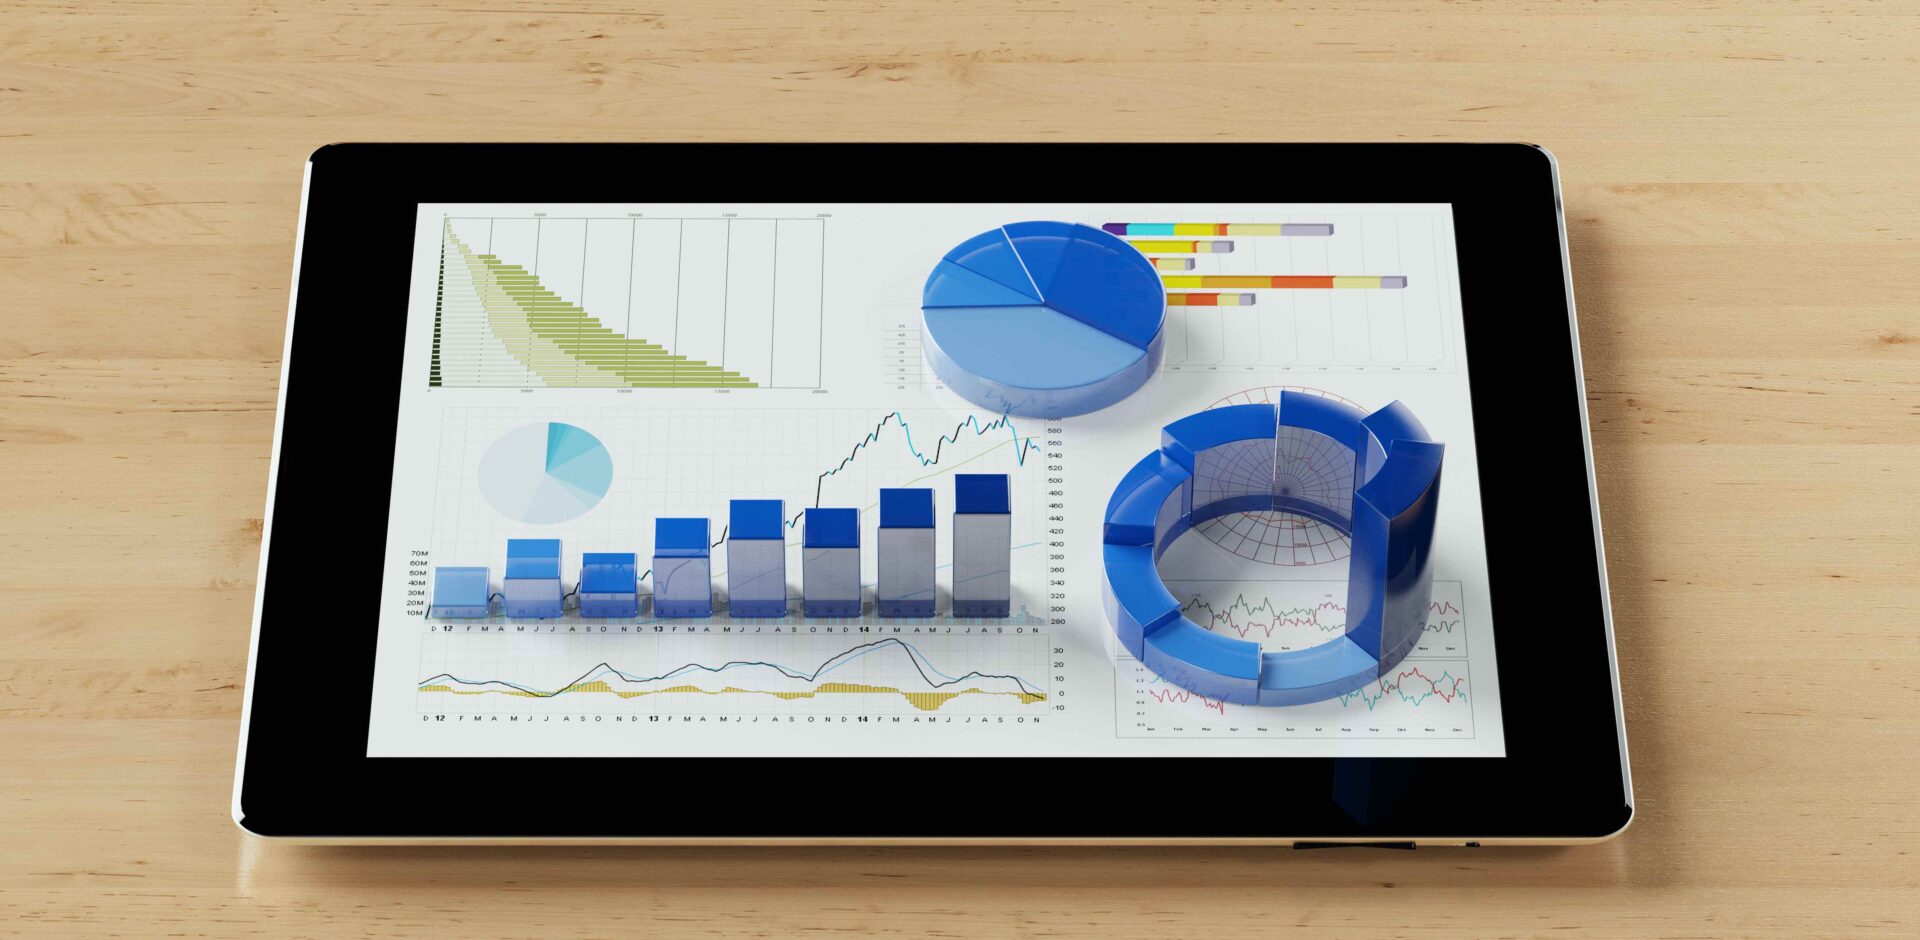 3D graphs and charts on ipad